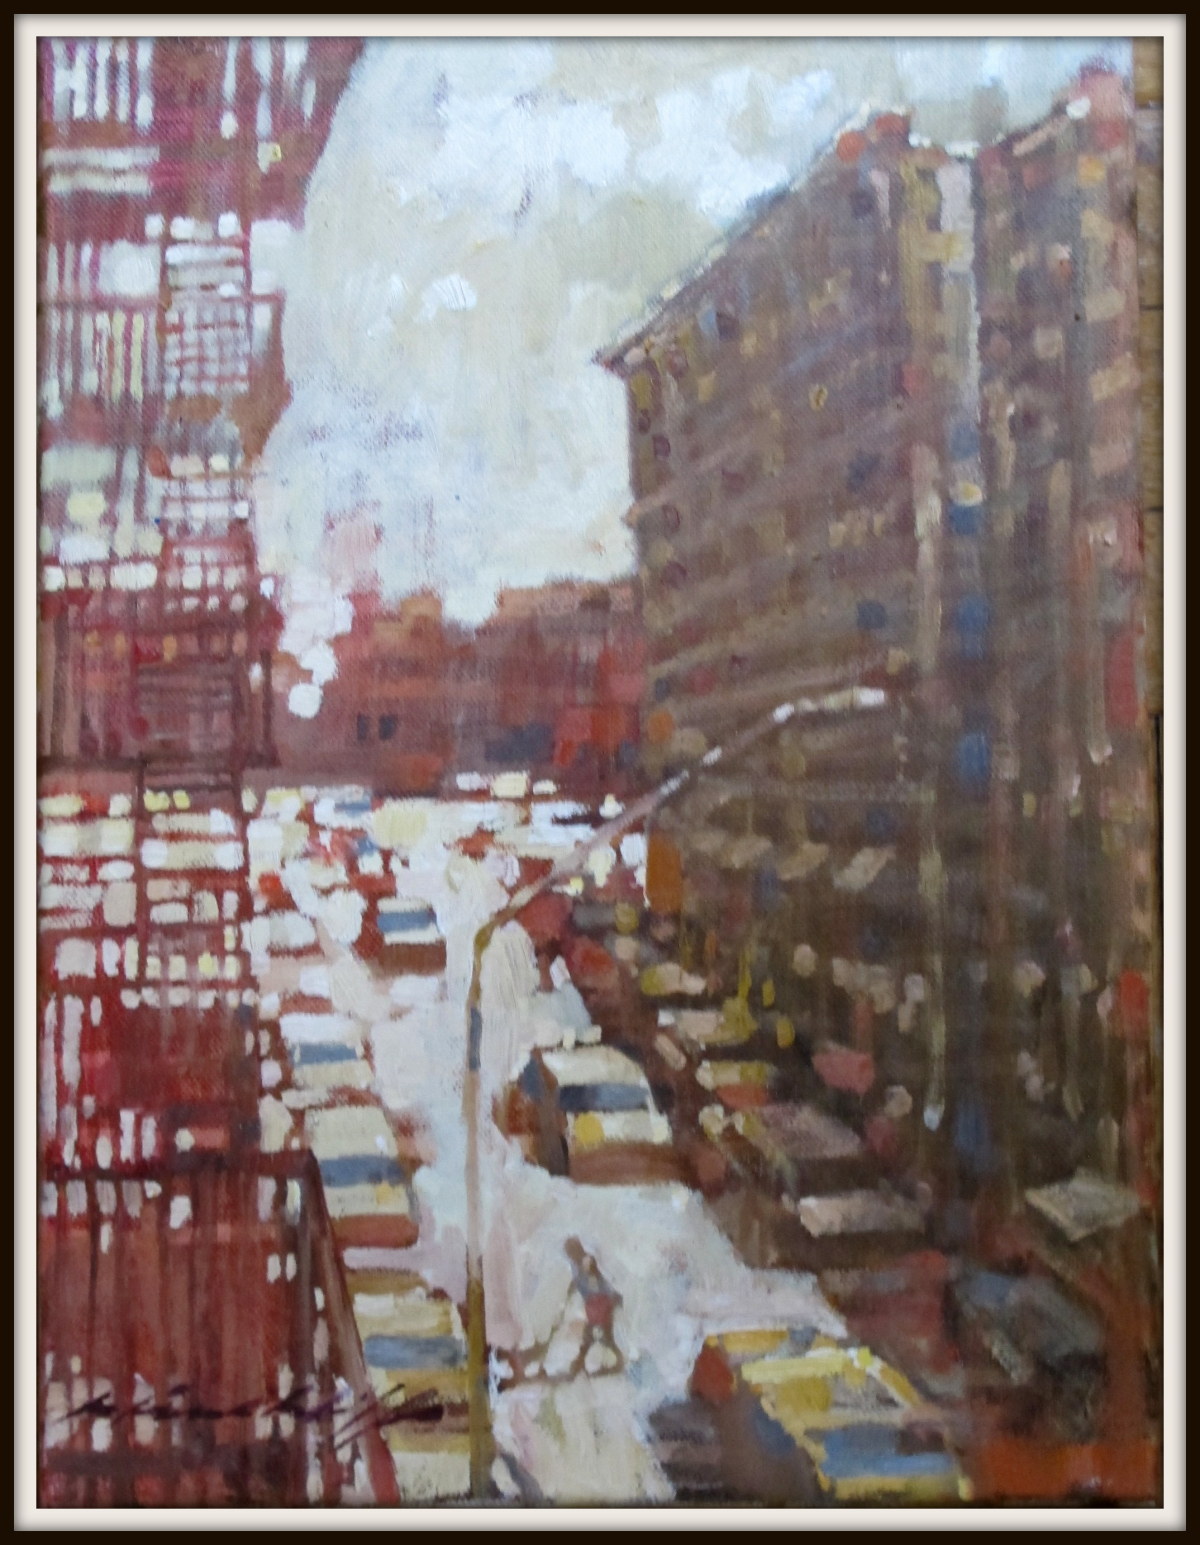 Study for "View from the Studio, Harlem"